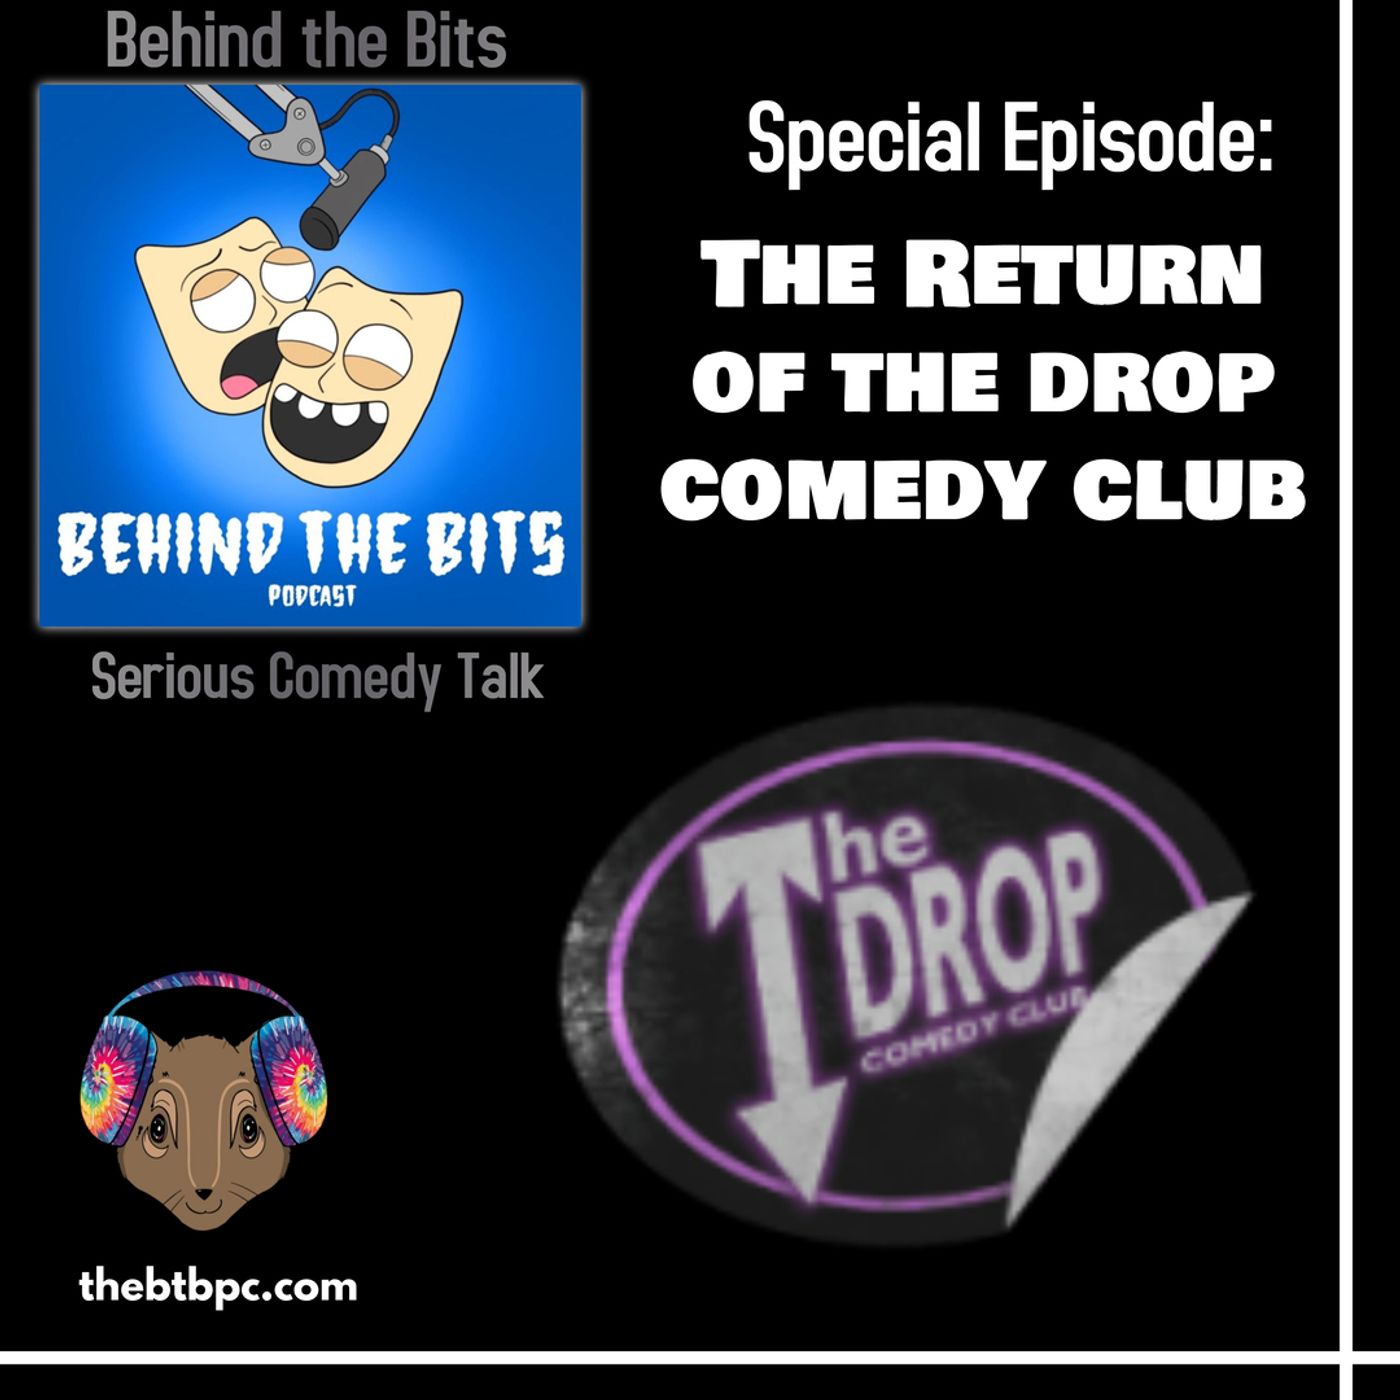 Special Episode: Return of the Drop Comedy Club Image